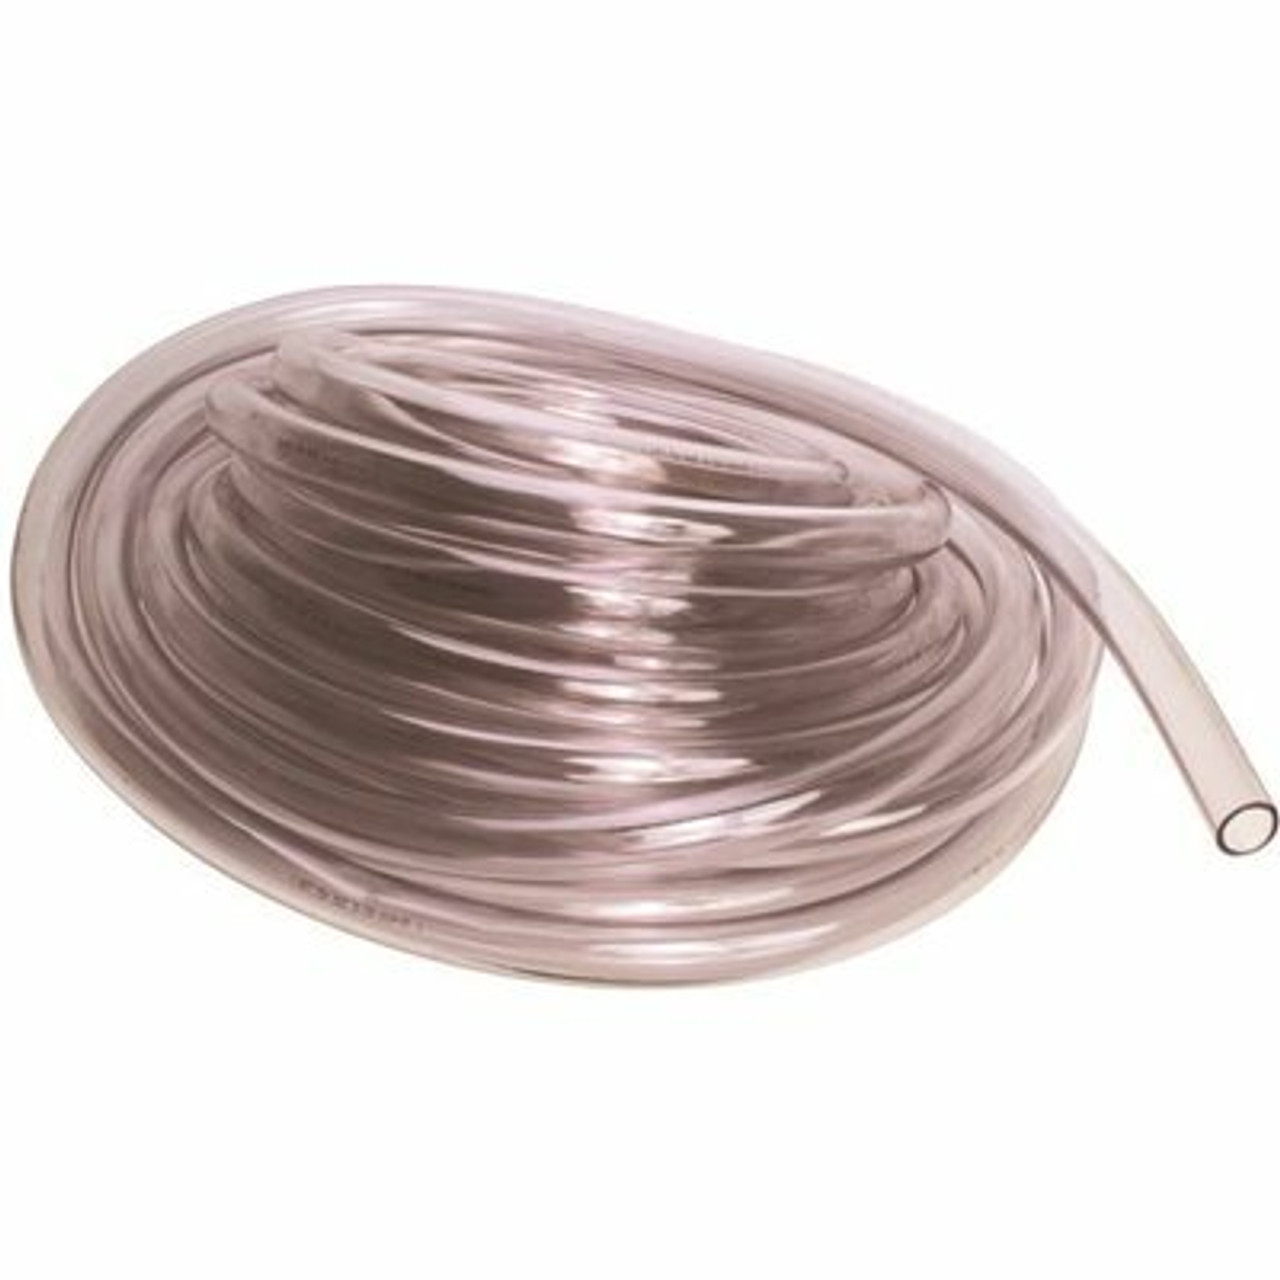 Sioux Chief 3/8 In. Id X 9/16 In. Od 100 Ft. Vinyl Tubing